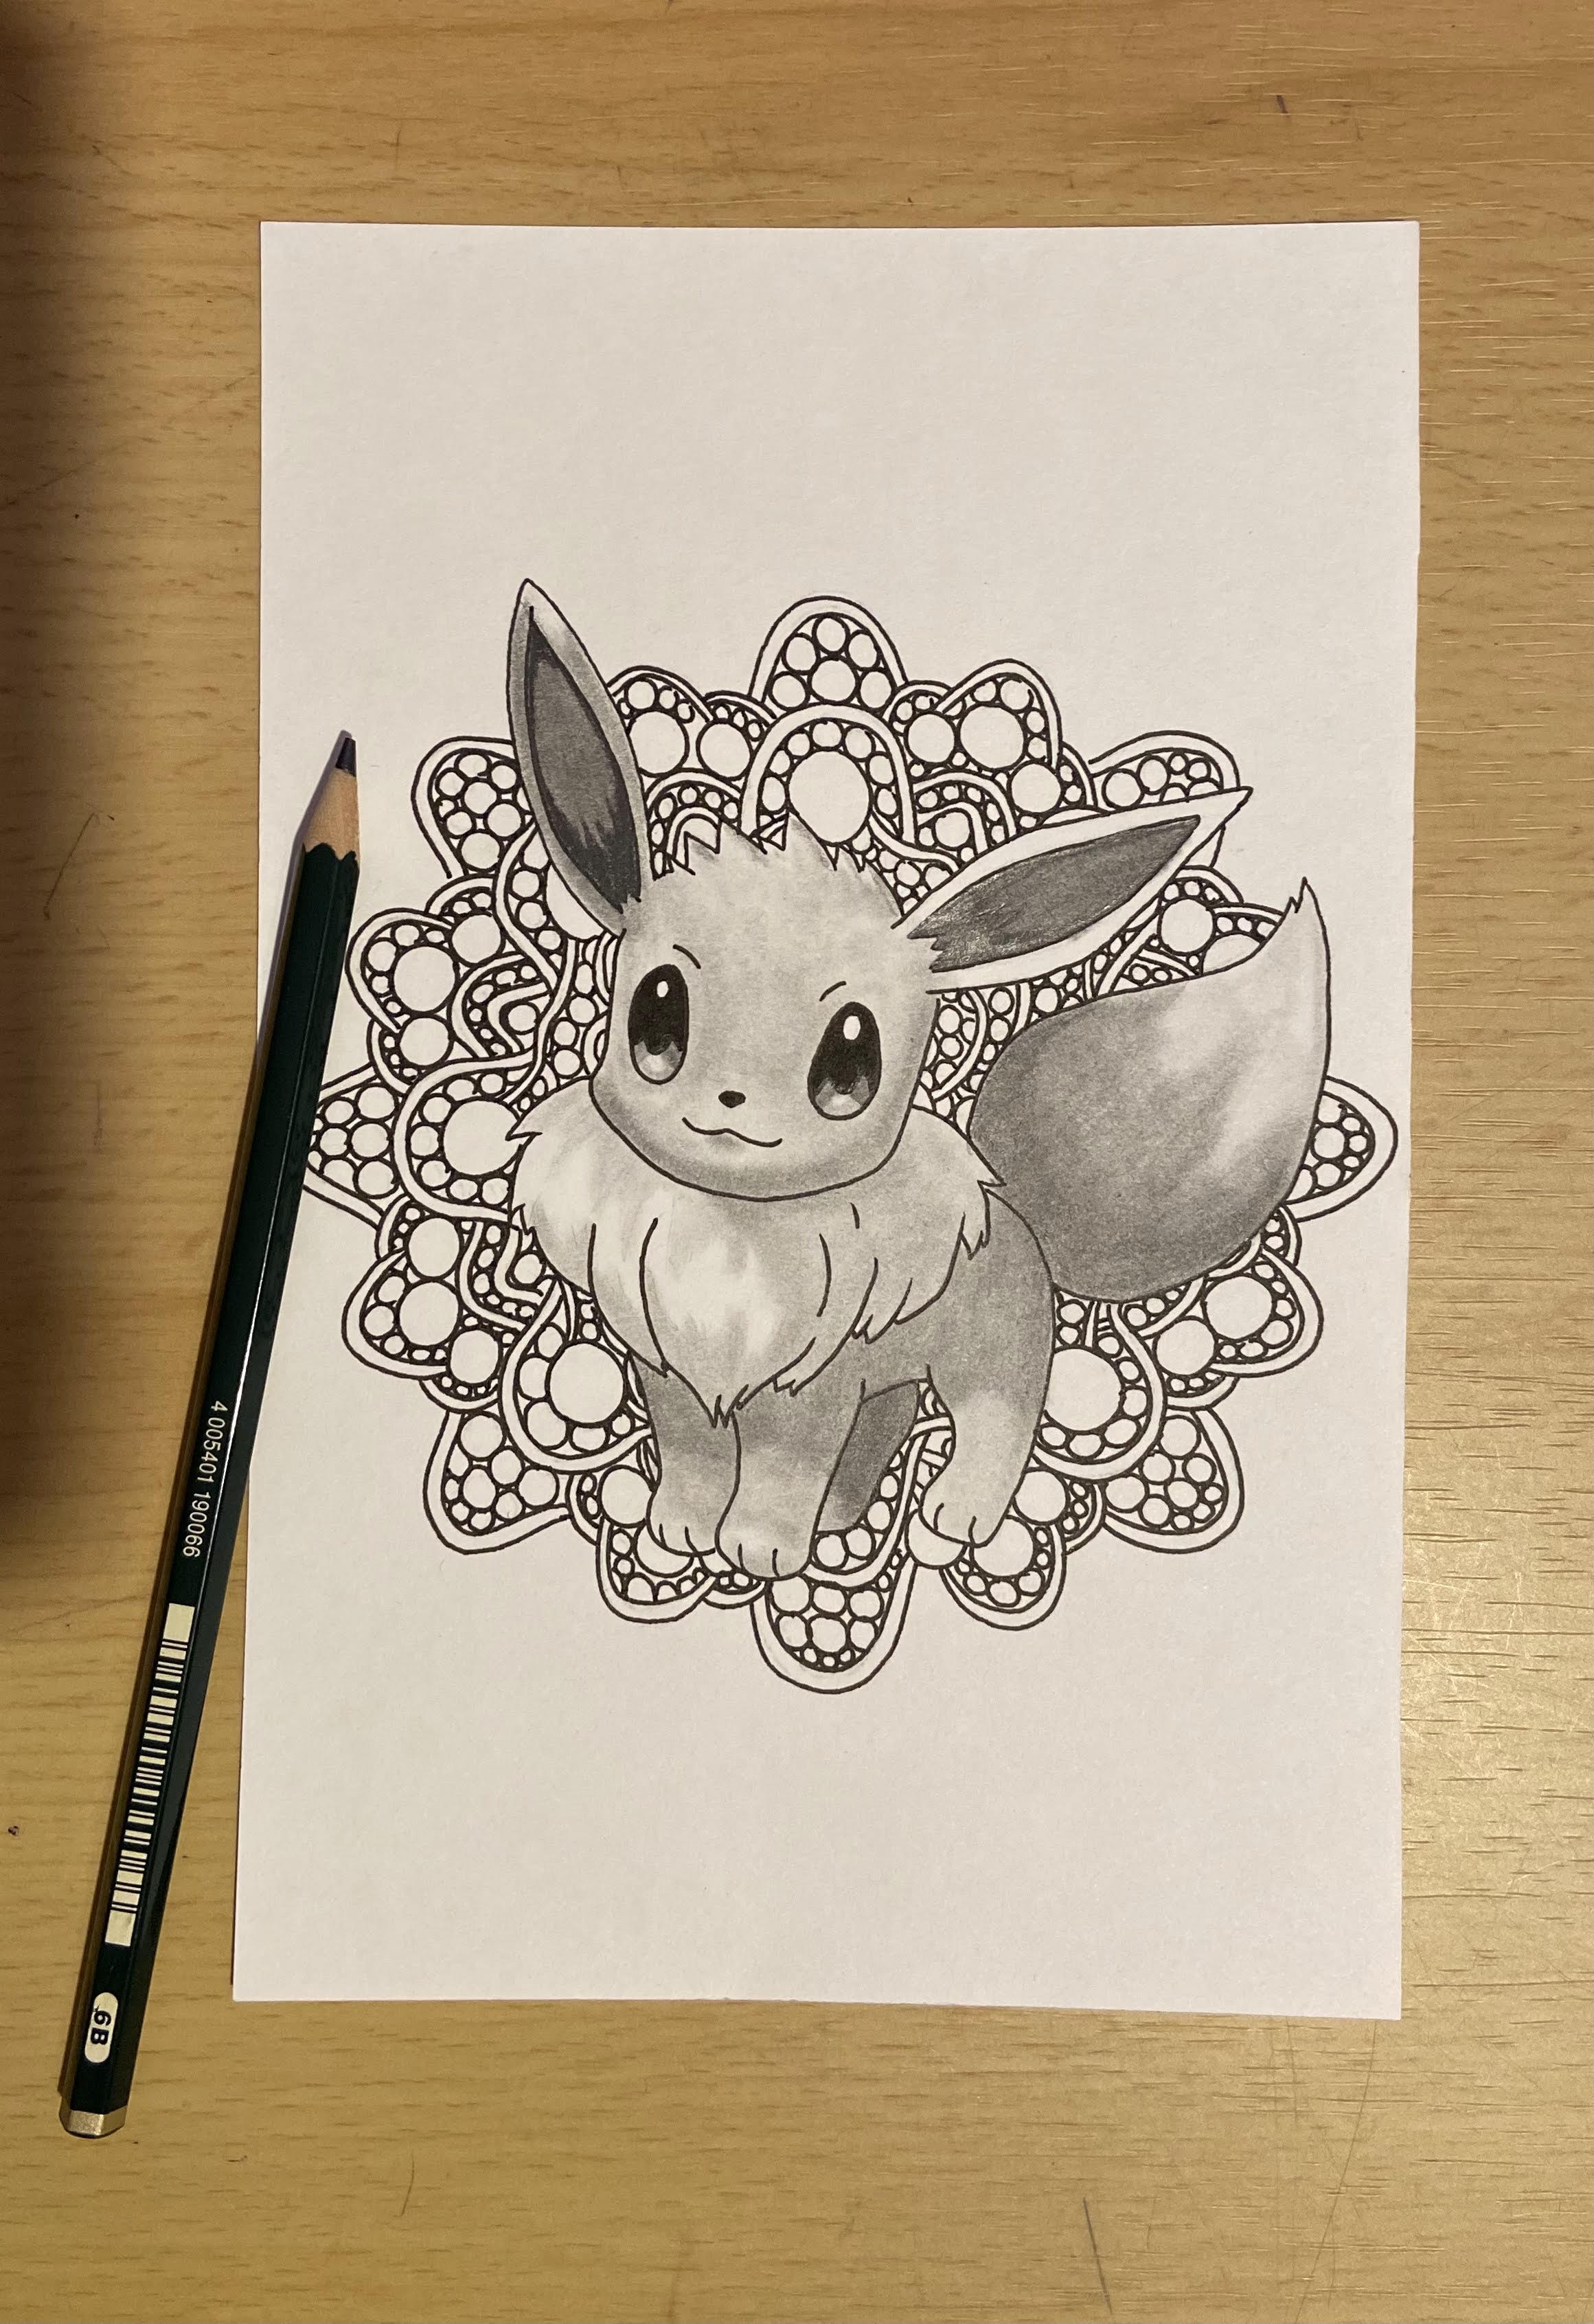 Pencil drawing of the Pokemon Eevee